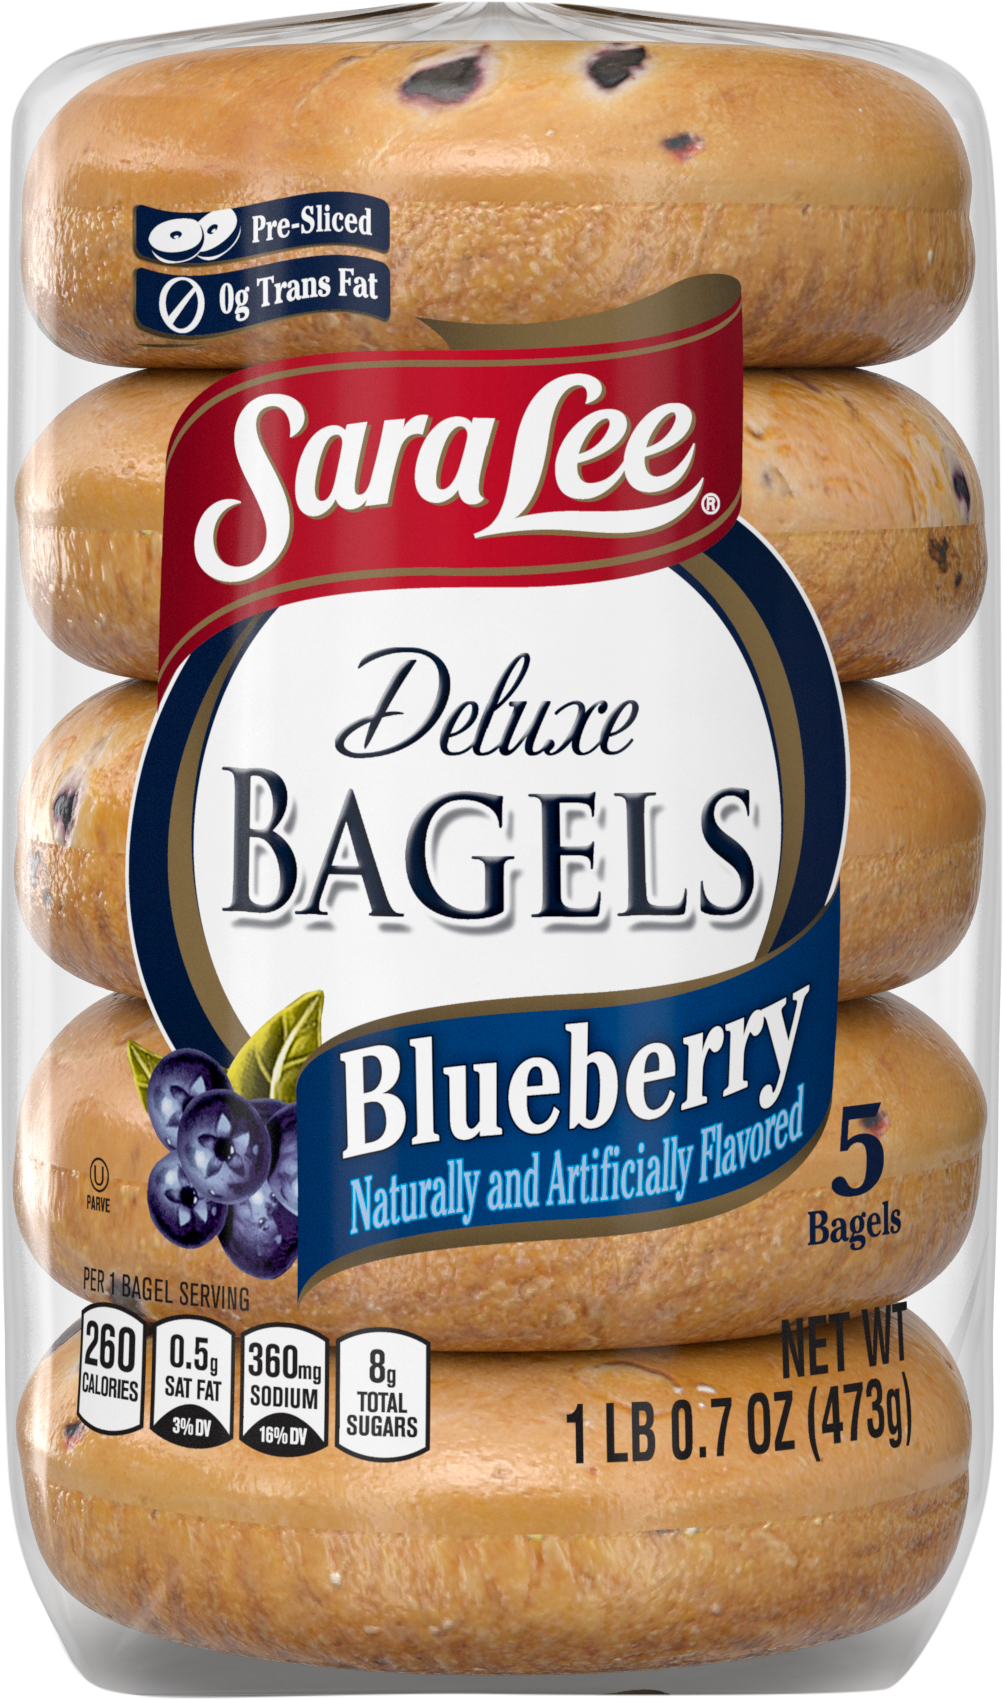 Calories in Bagels, Blueberry, Deluxe from Sara Lee